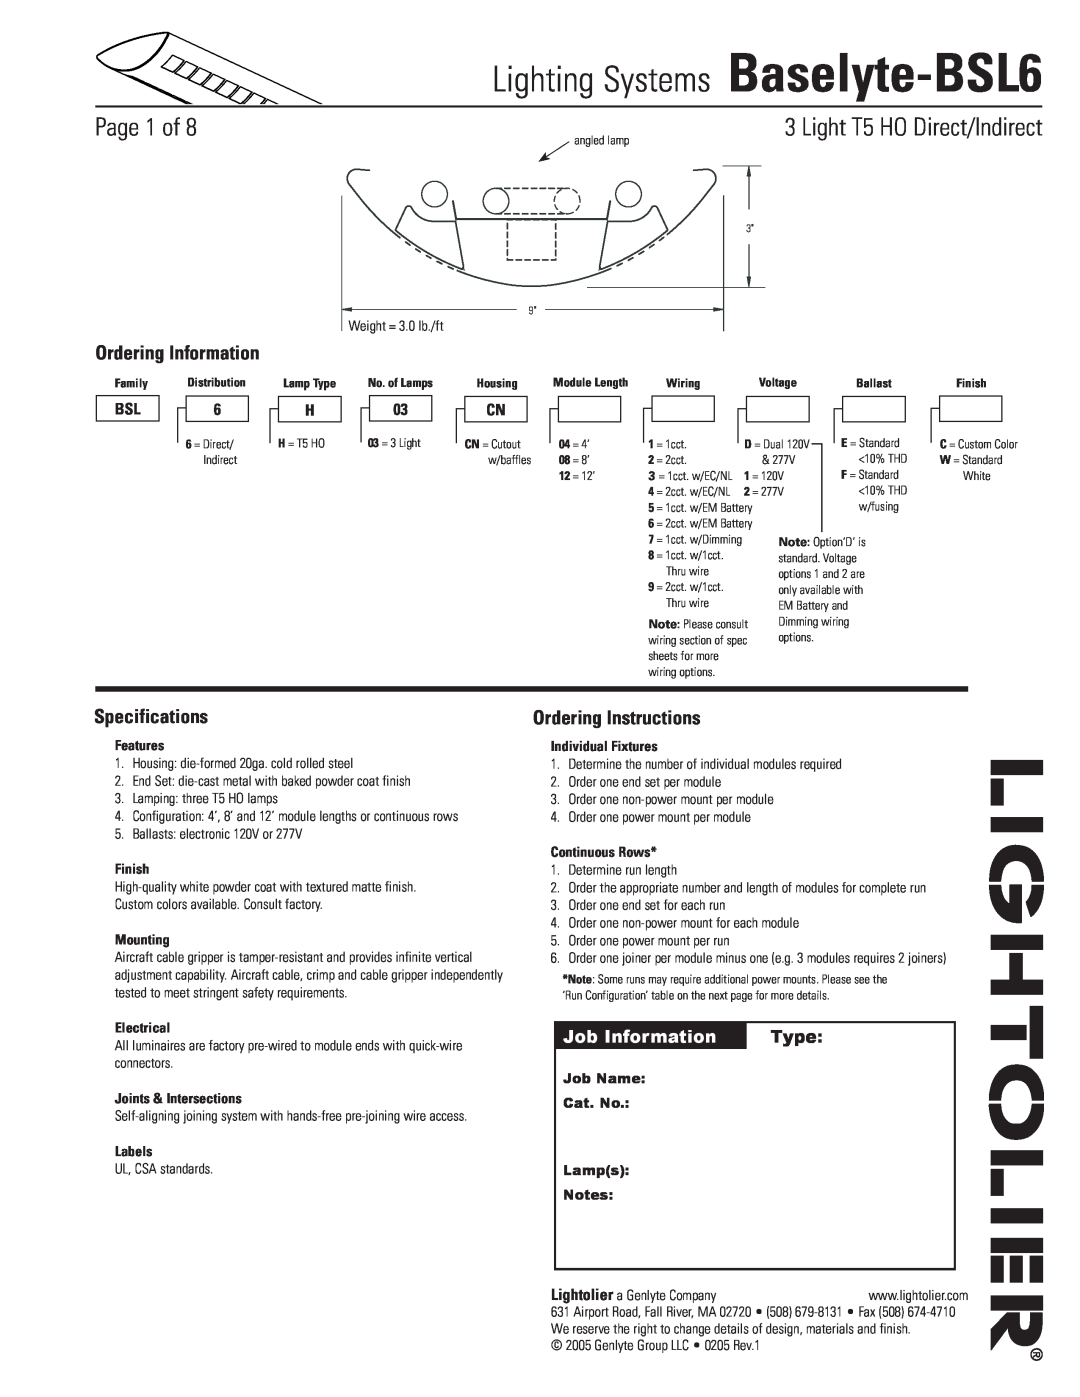 Lightolier specifications Lighting Systems Baselyte-BSL6, Page  of, Ordering Information, Specifications, Type, Finish 